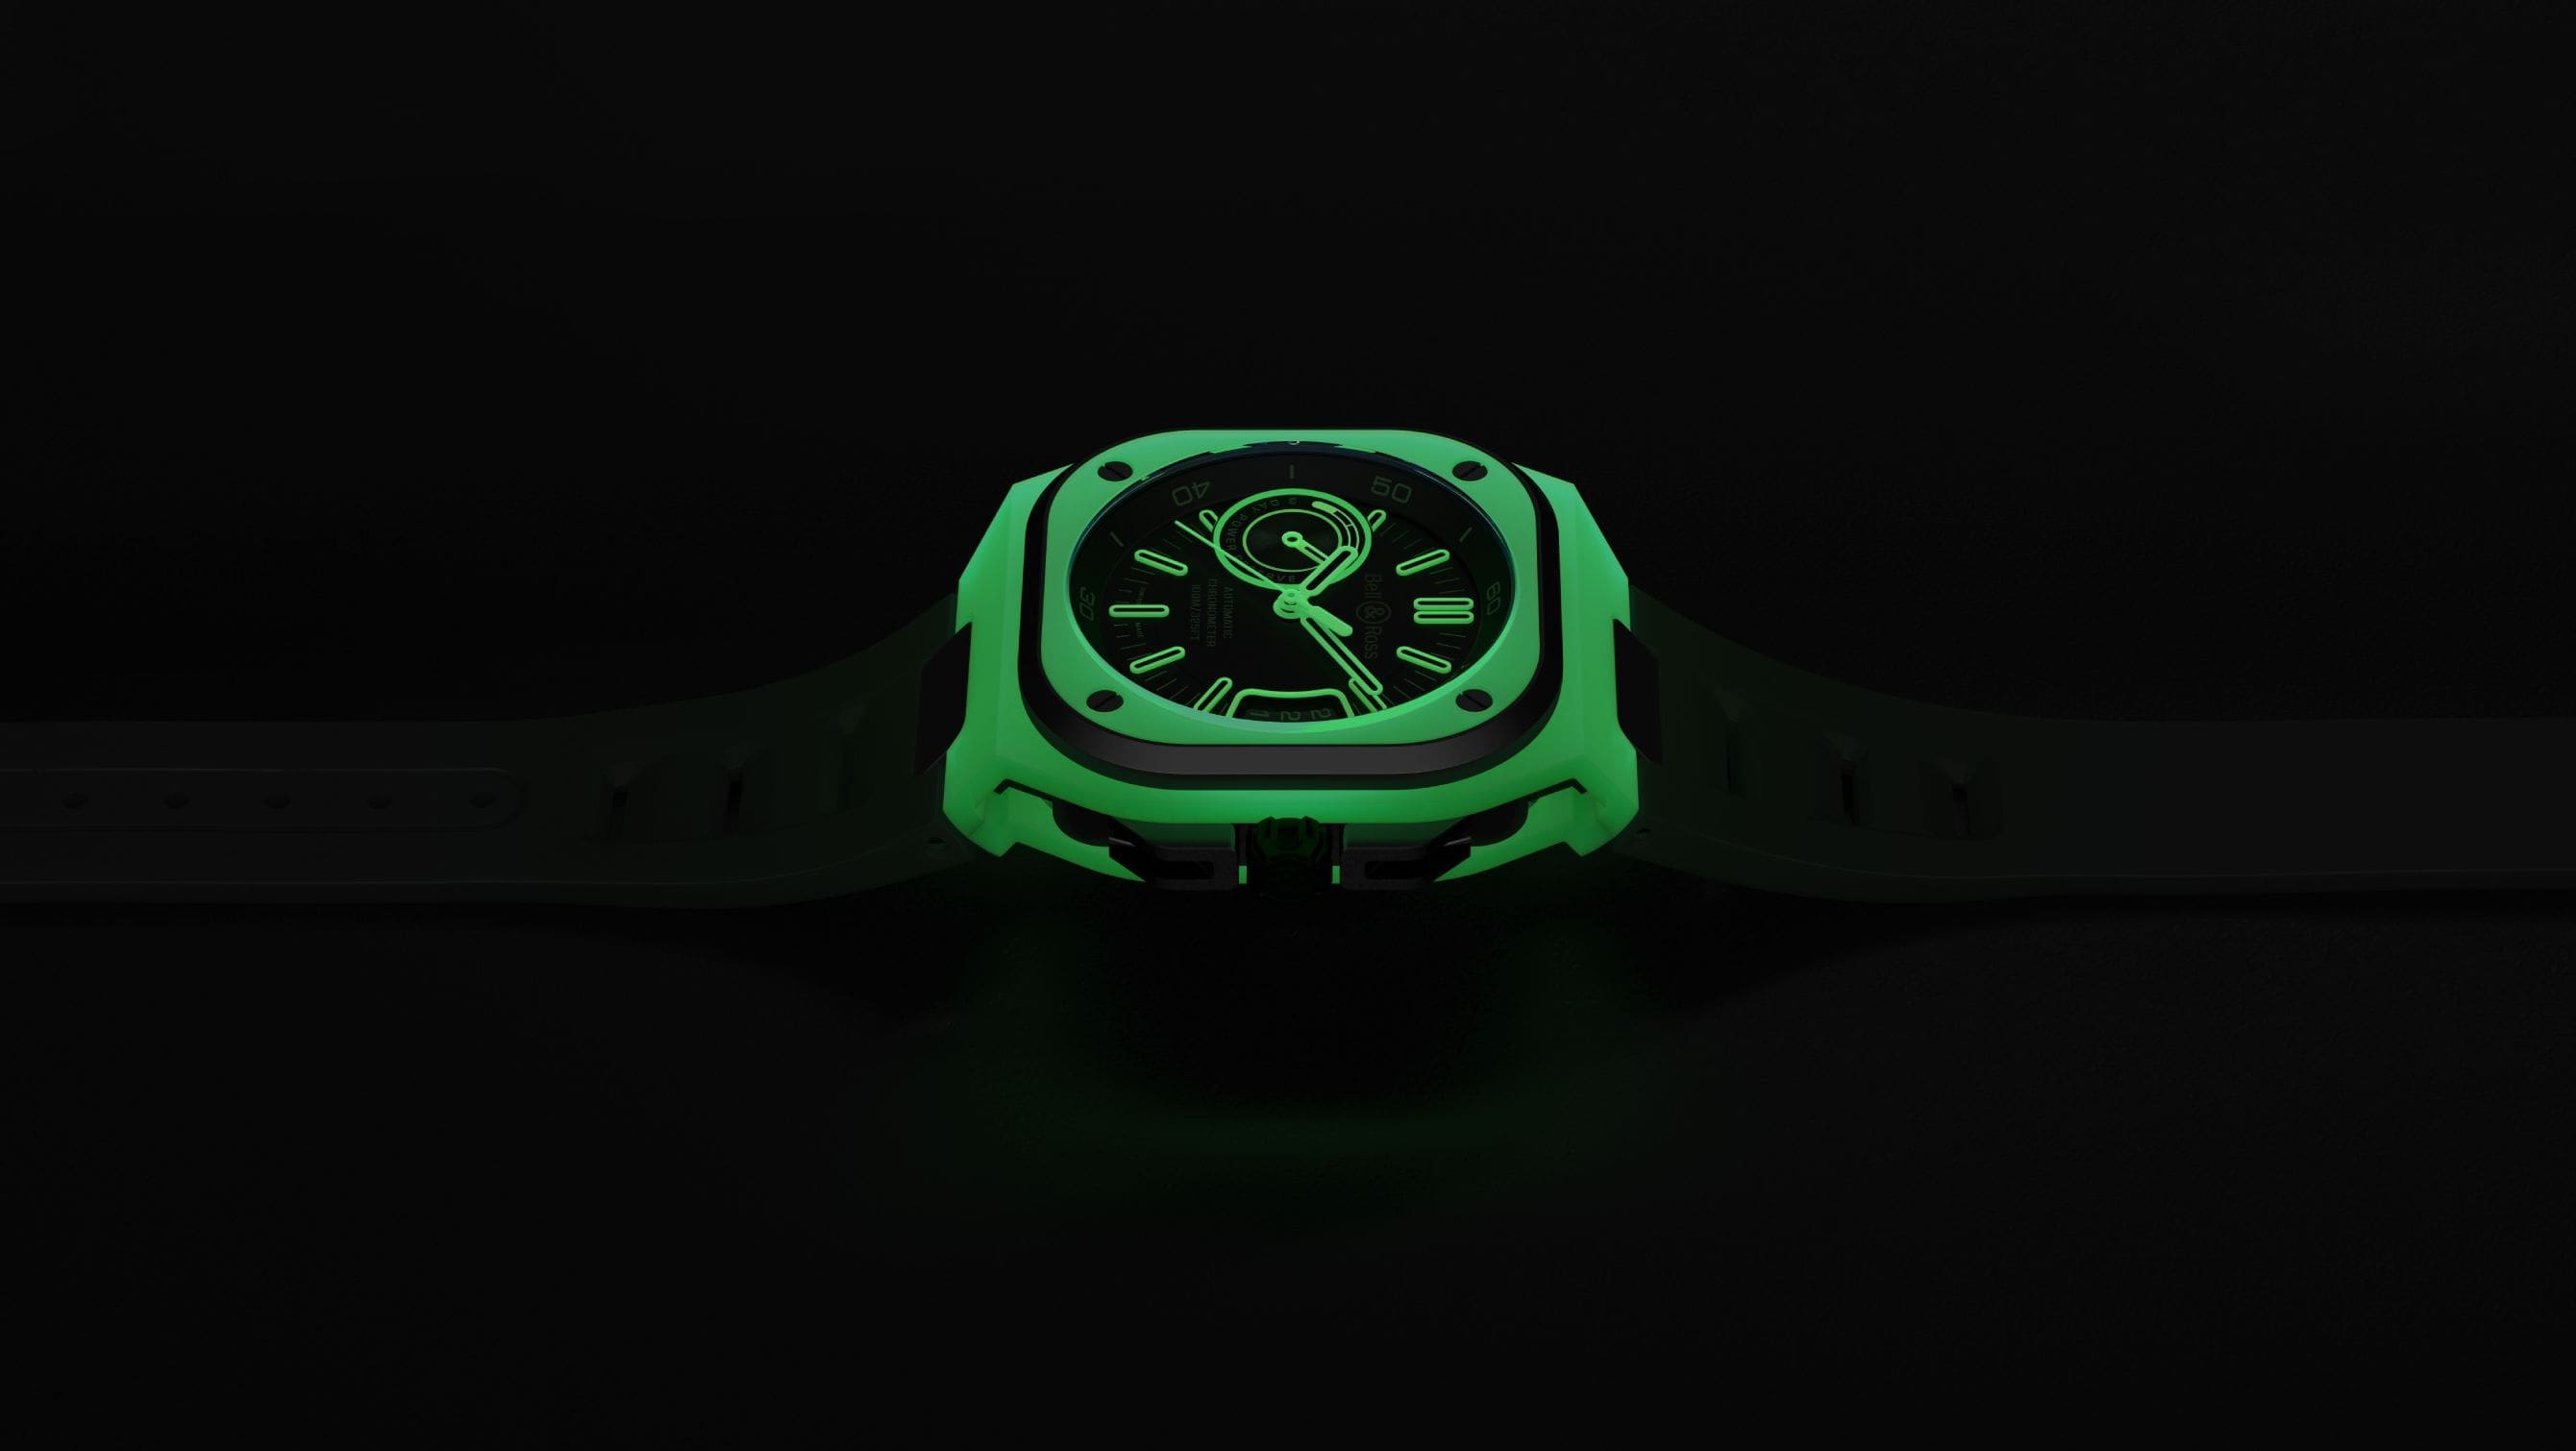 Bell & Ross’ BR-X5 Green Lum is their most sci-fi watch yet